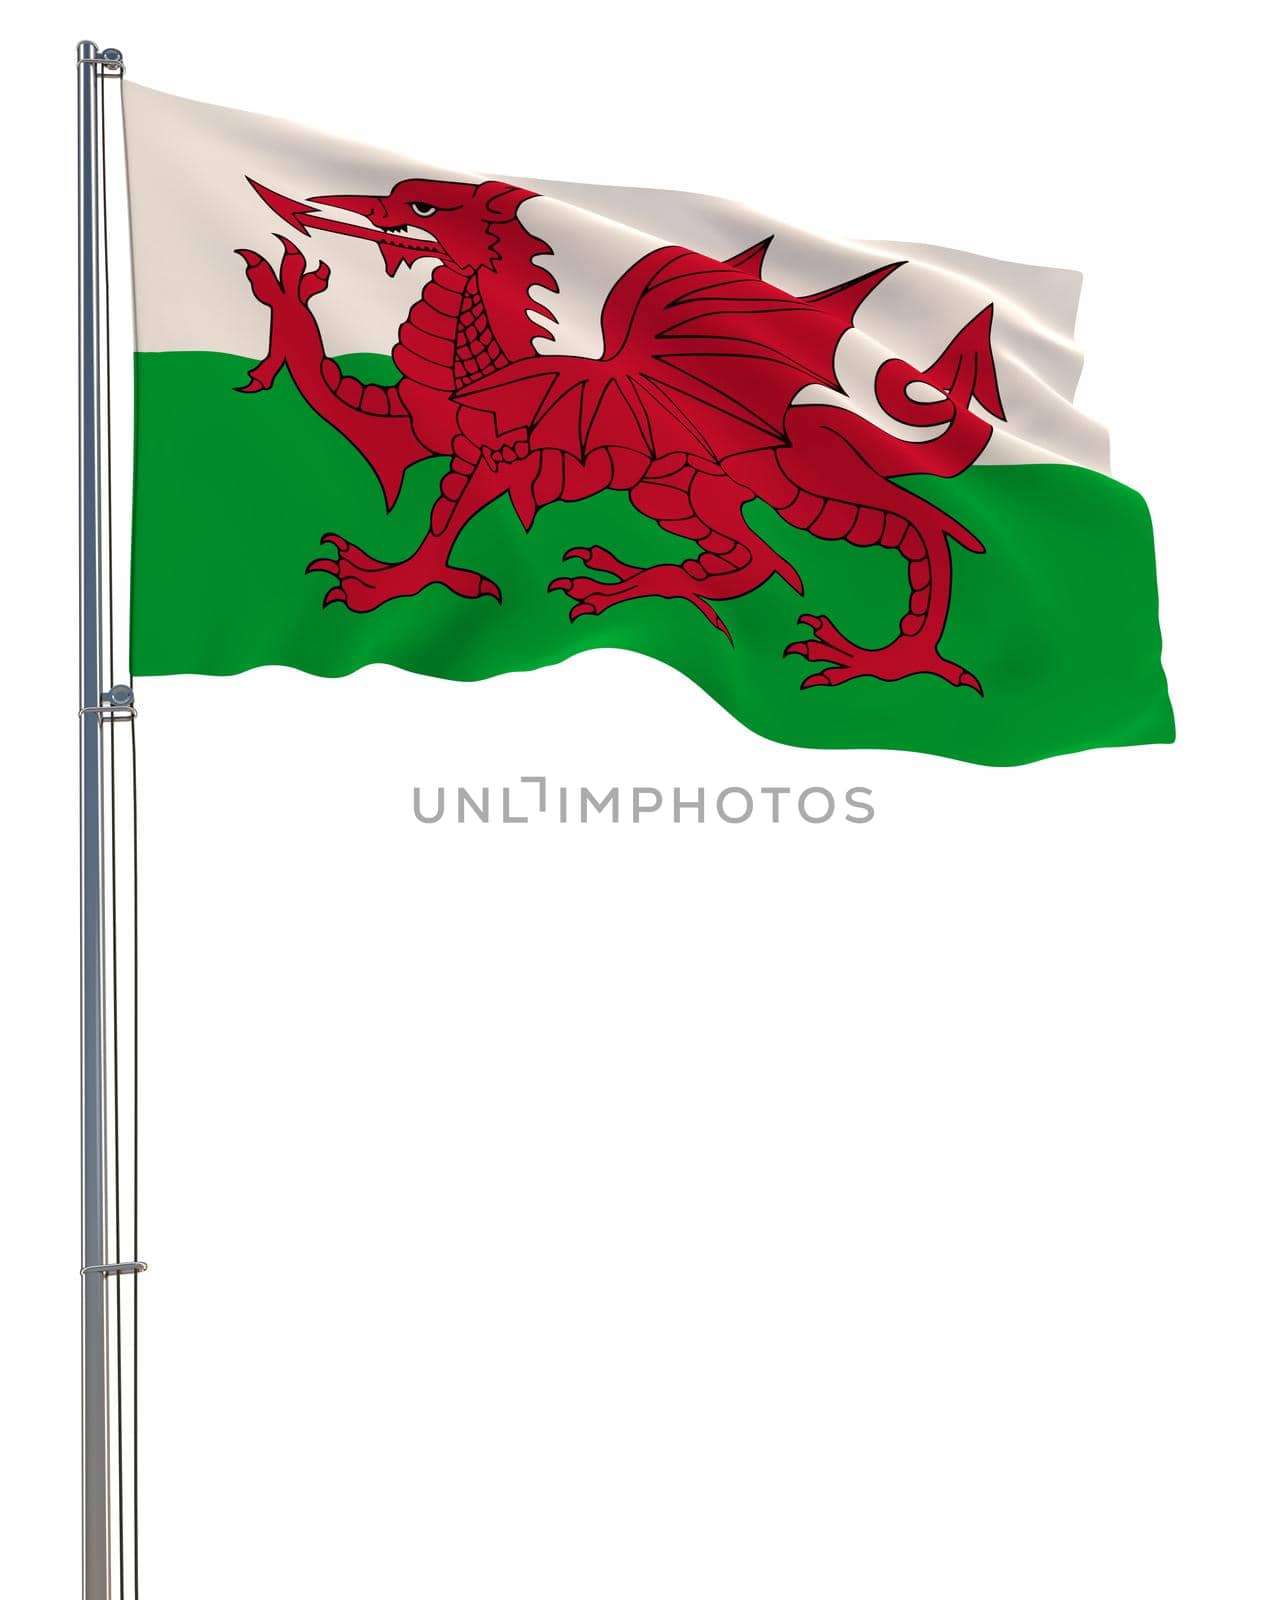 Wales flag waving in the wind, white background, realistic 3D rendering by gladder